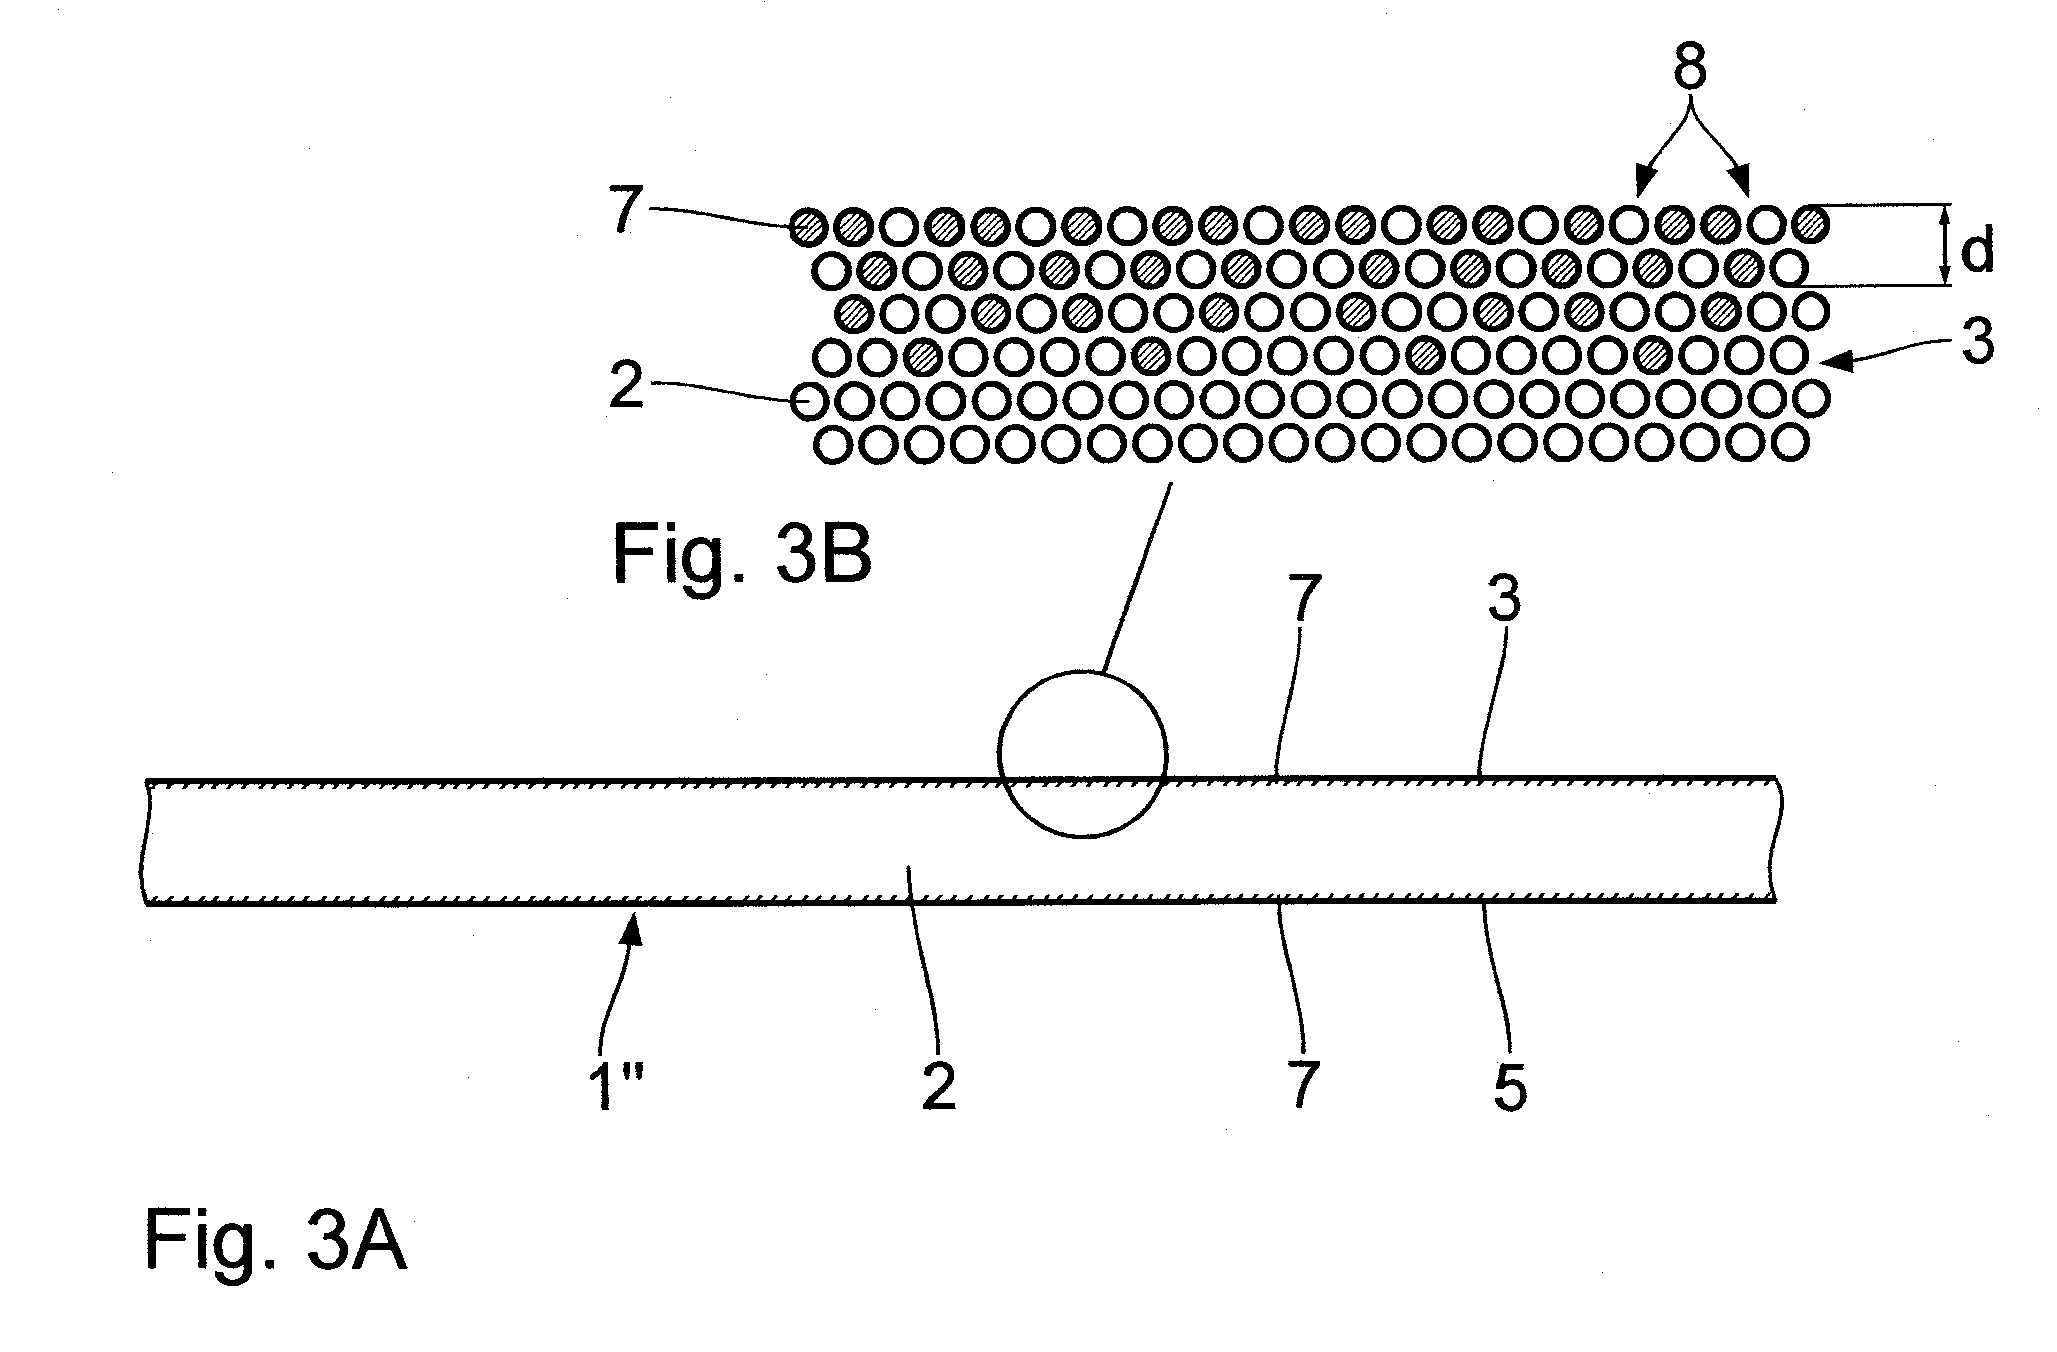 Absorbable medical element suitable for insertion into the body, in particular an absorbable implant